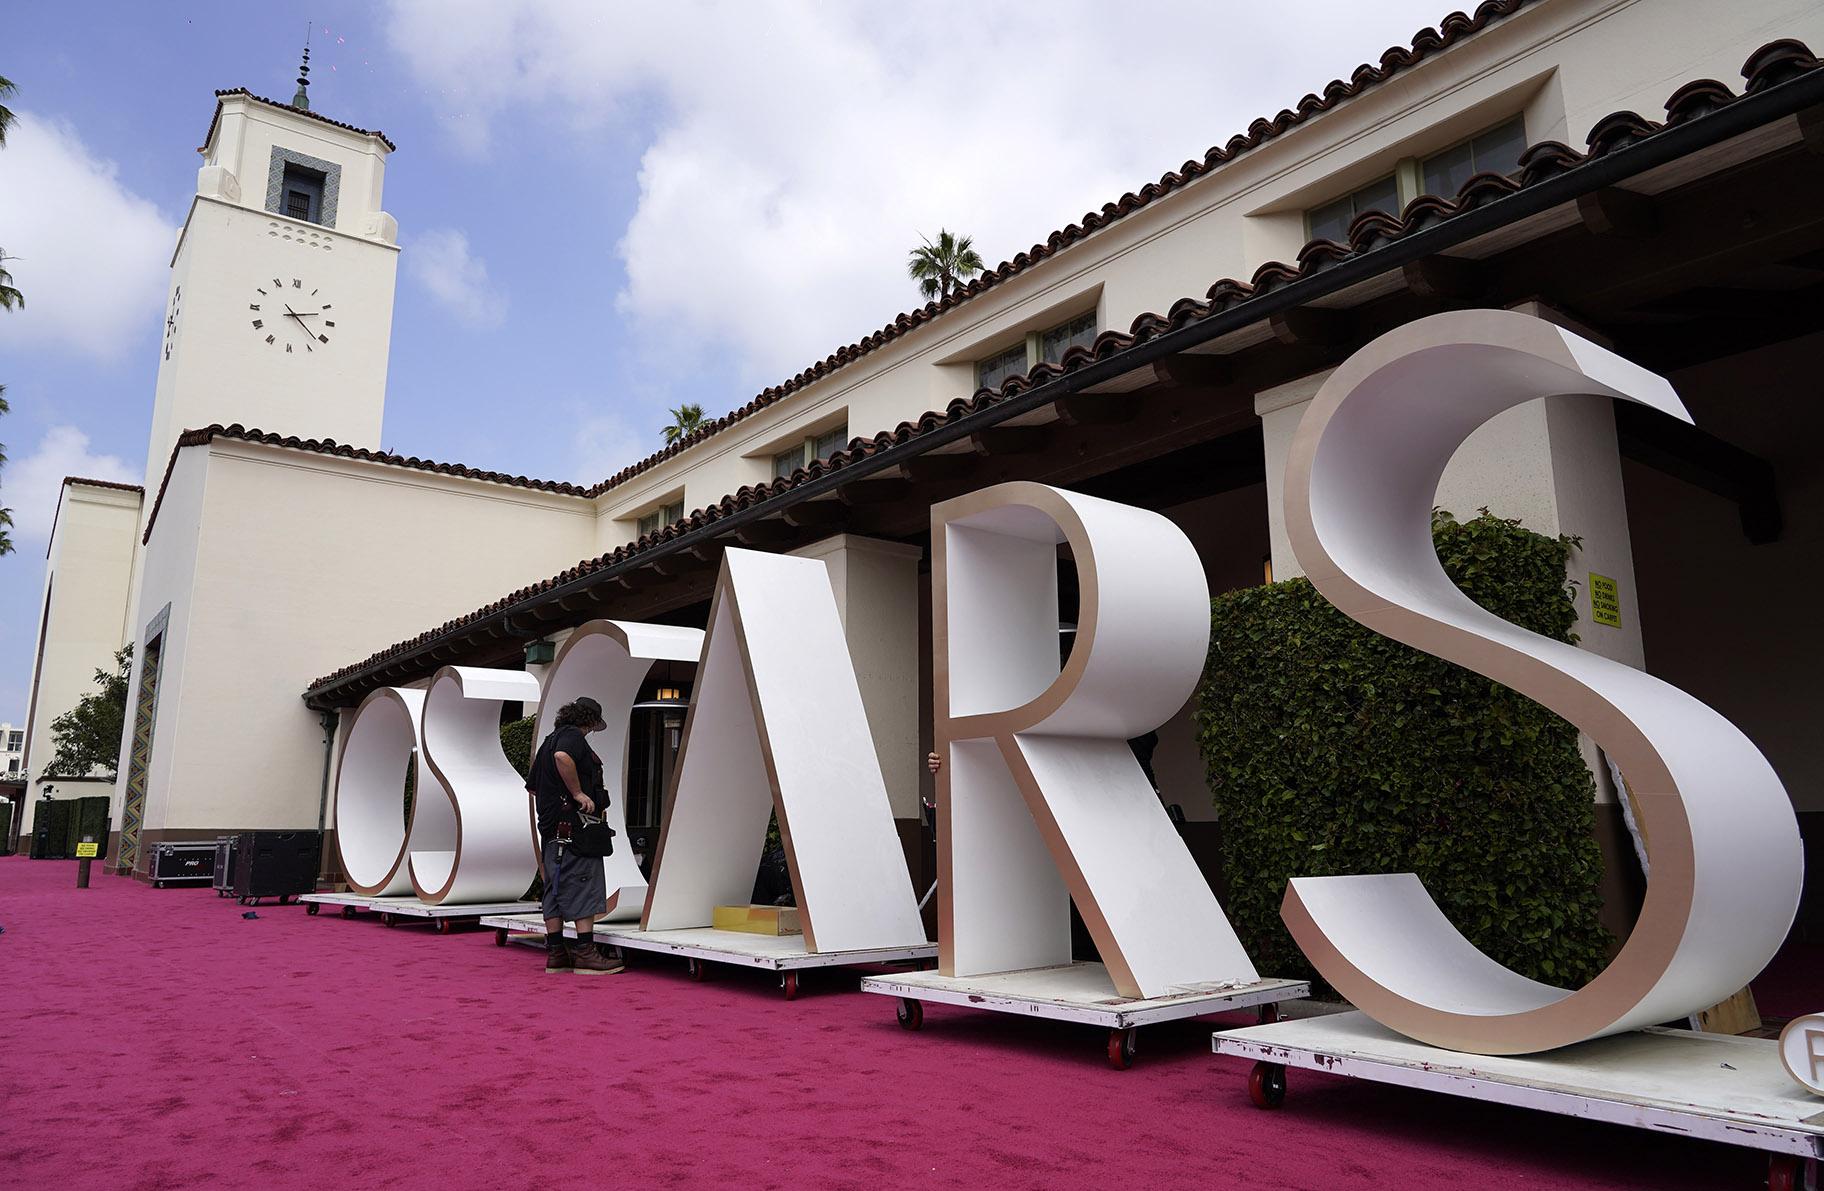 An Academy Awards crew member looks over a background element for the red carpet at Union Station, one of the locations for Sunday’s 93rd Academy Awards, Saturday, April 24, 2021, in Los Angeles. (AP Photo / Chris Pizzello)